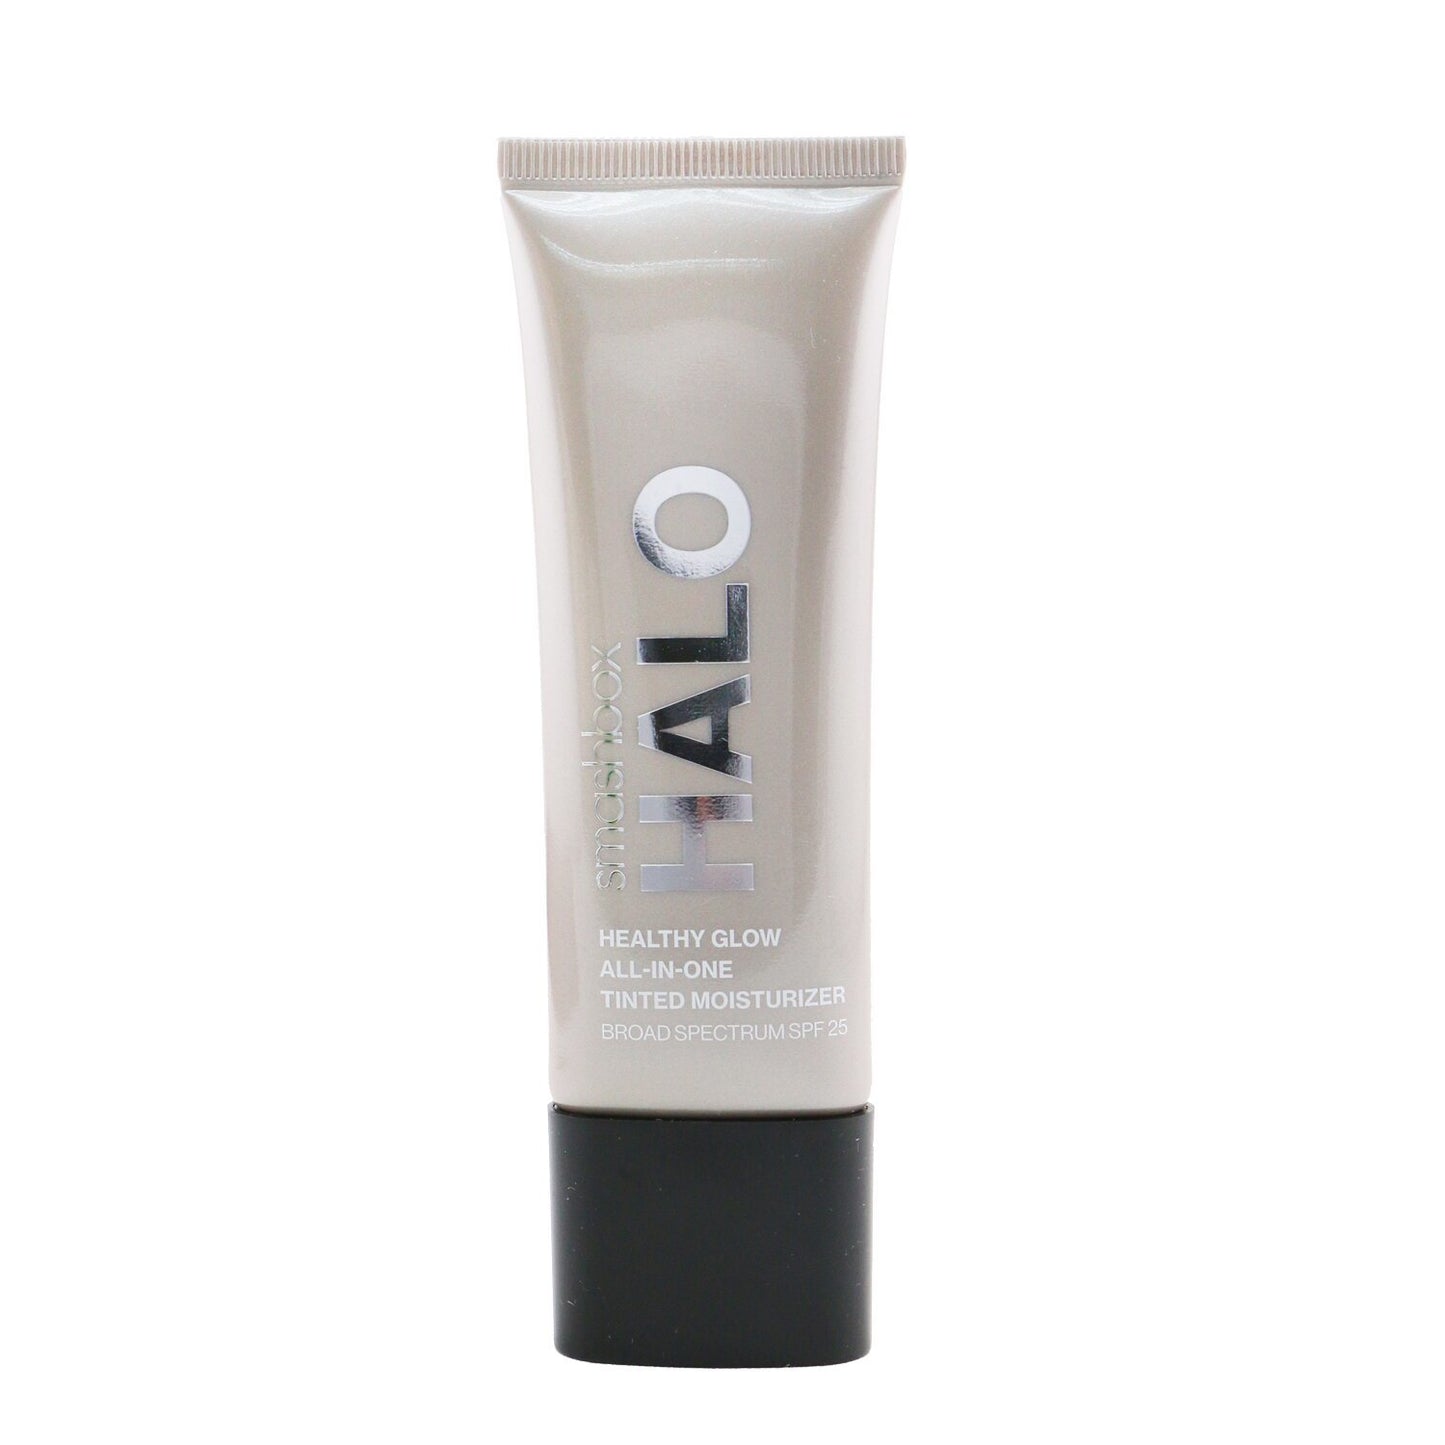 Halo Healthy Glow All In One Tinted Moisturizer SPF 25 - # Fair